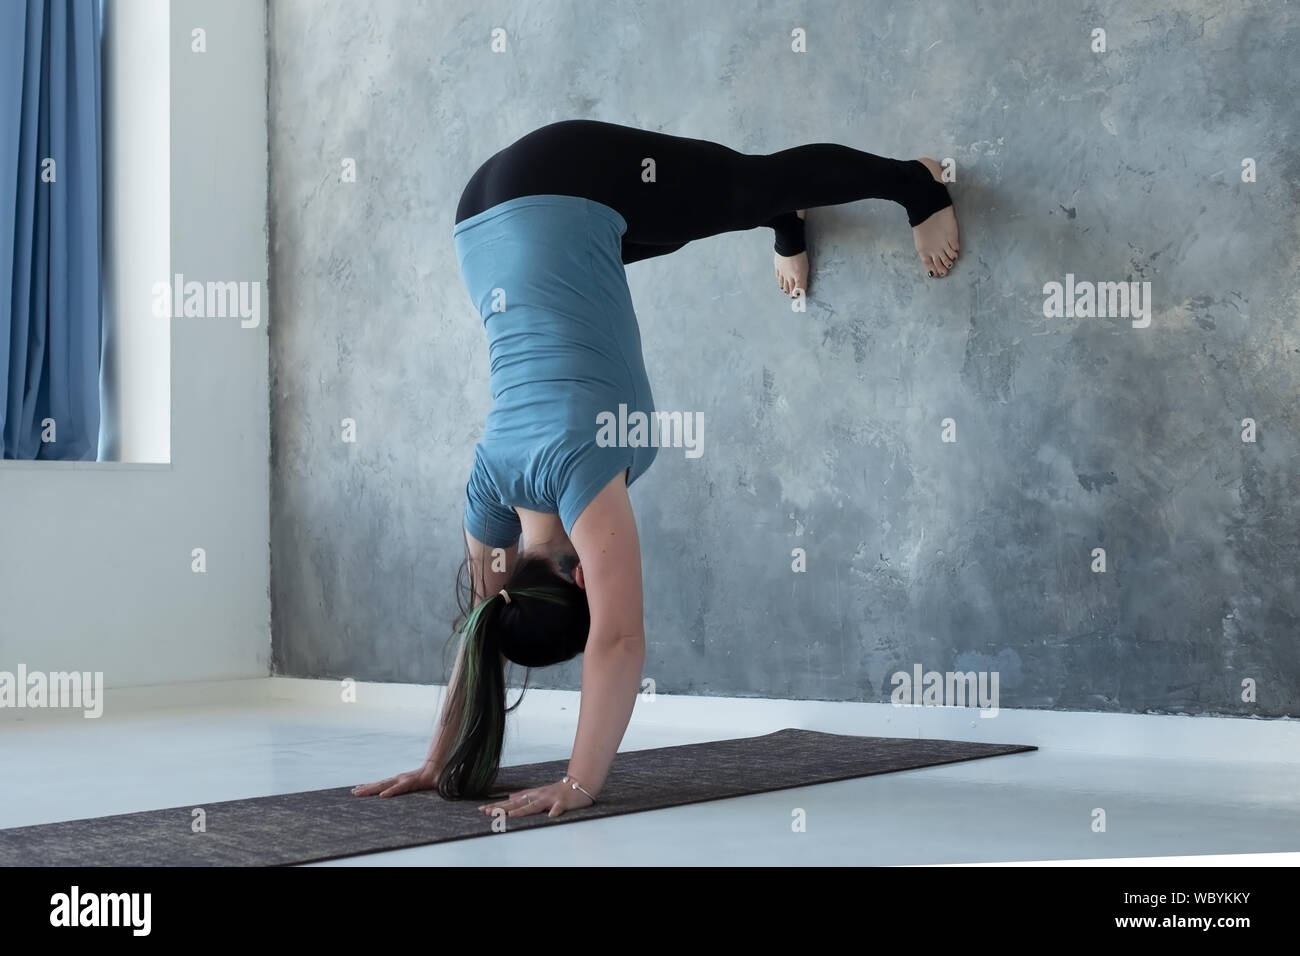 Woman learning to stand on hands near wall. Upside down yoga position. Studio shot Stock Photo